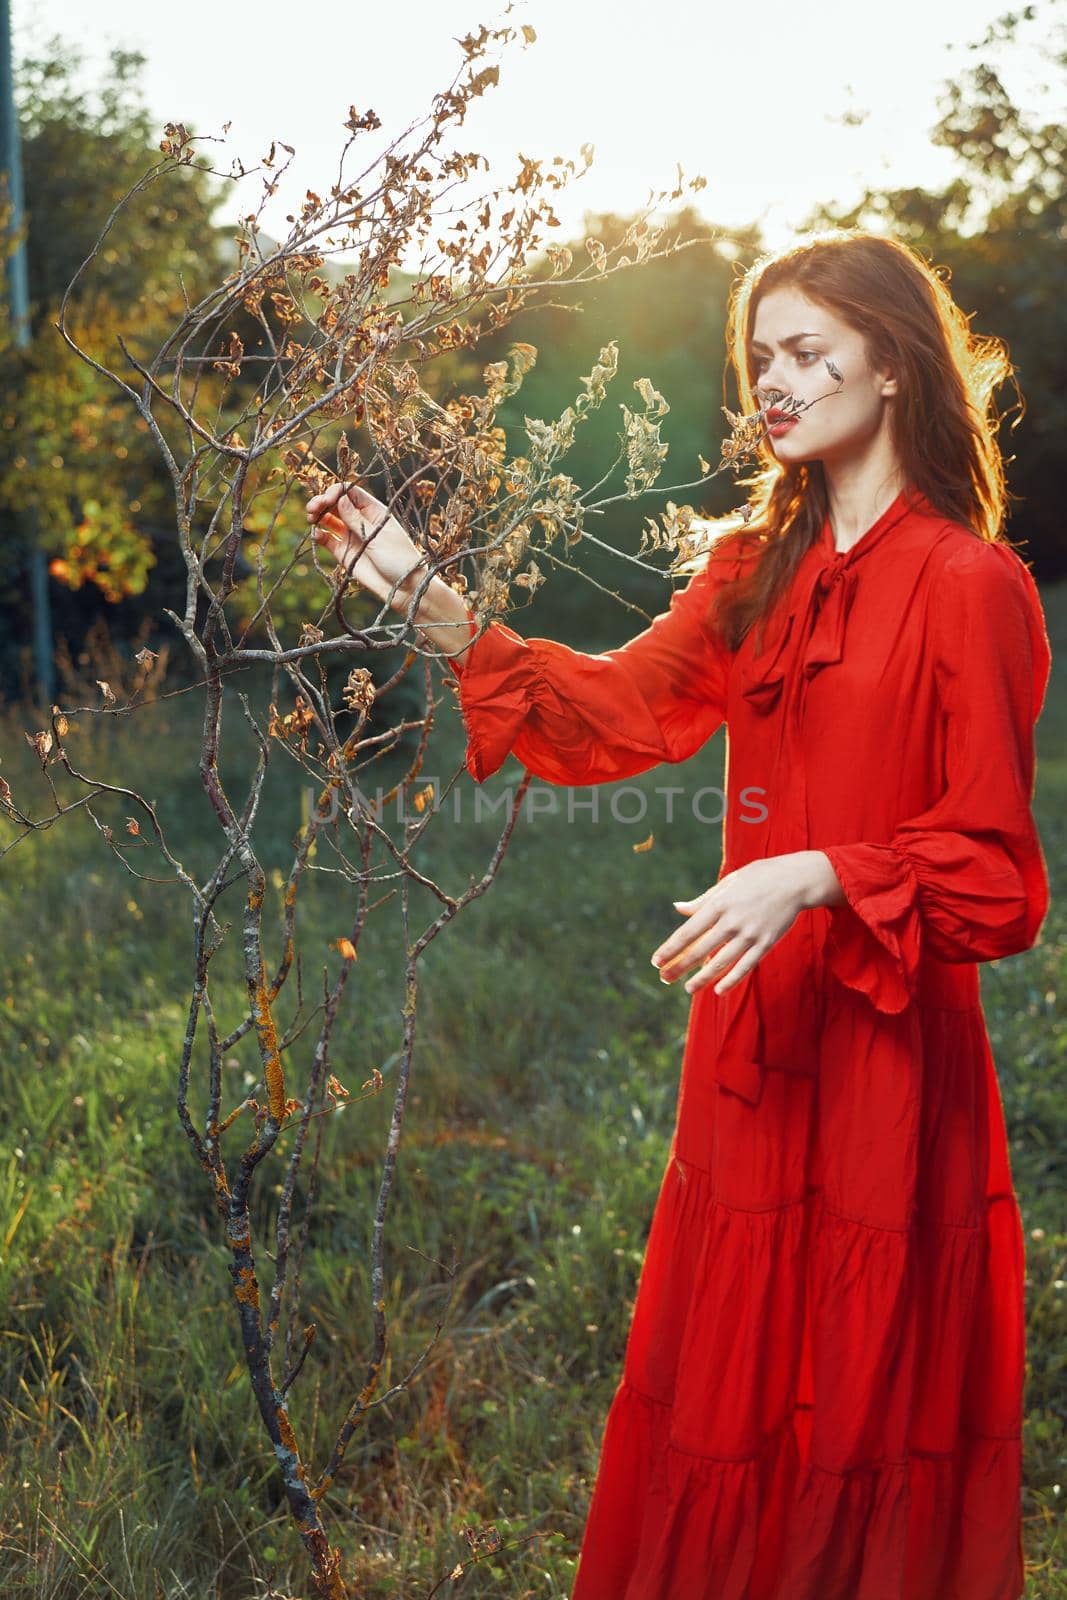 woman in red dress in field near tree posing summer. High quality photo